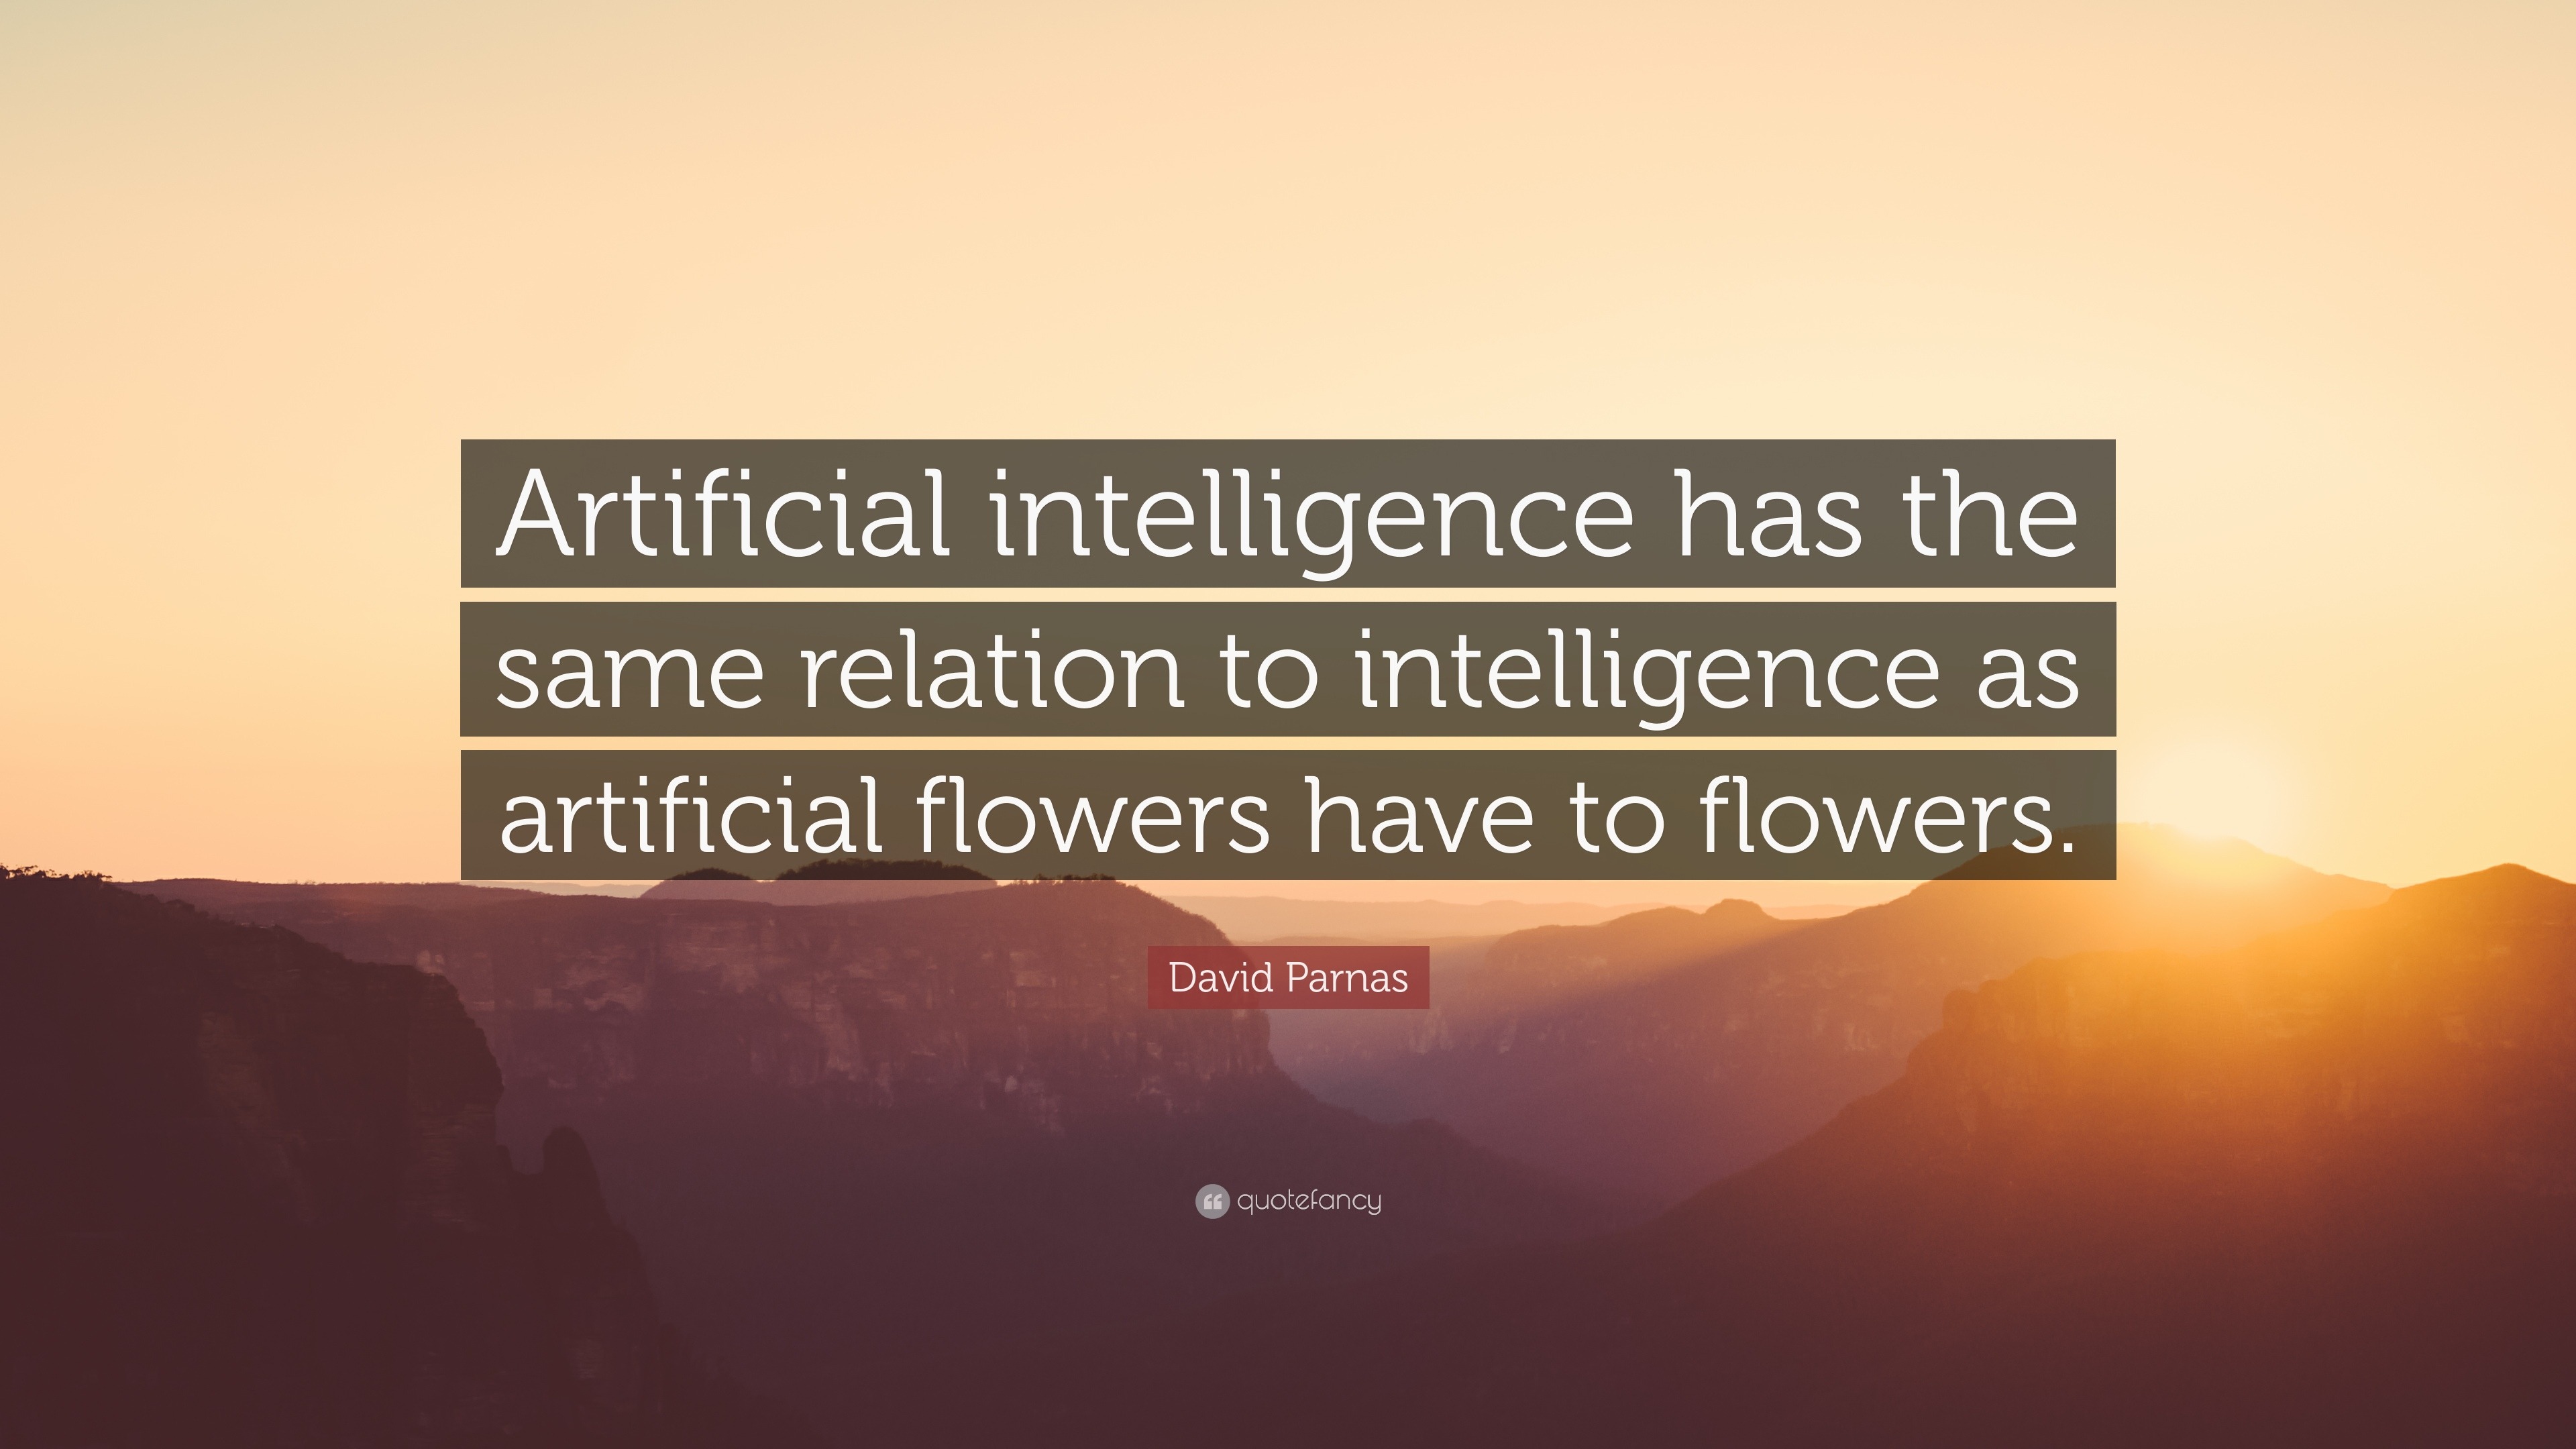 David Parnas Quote: “Artificial intelligence has the same relation to ...